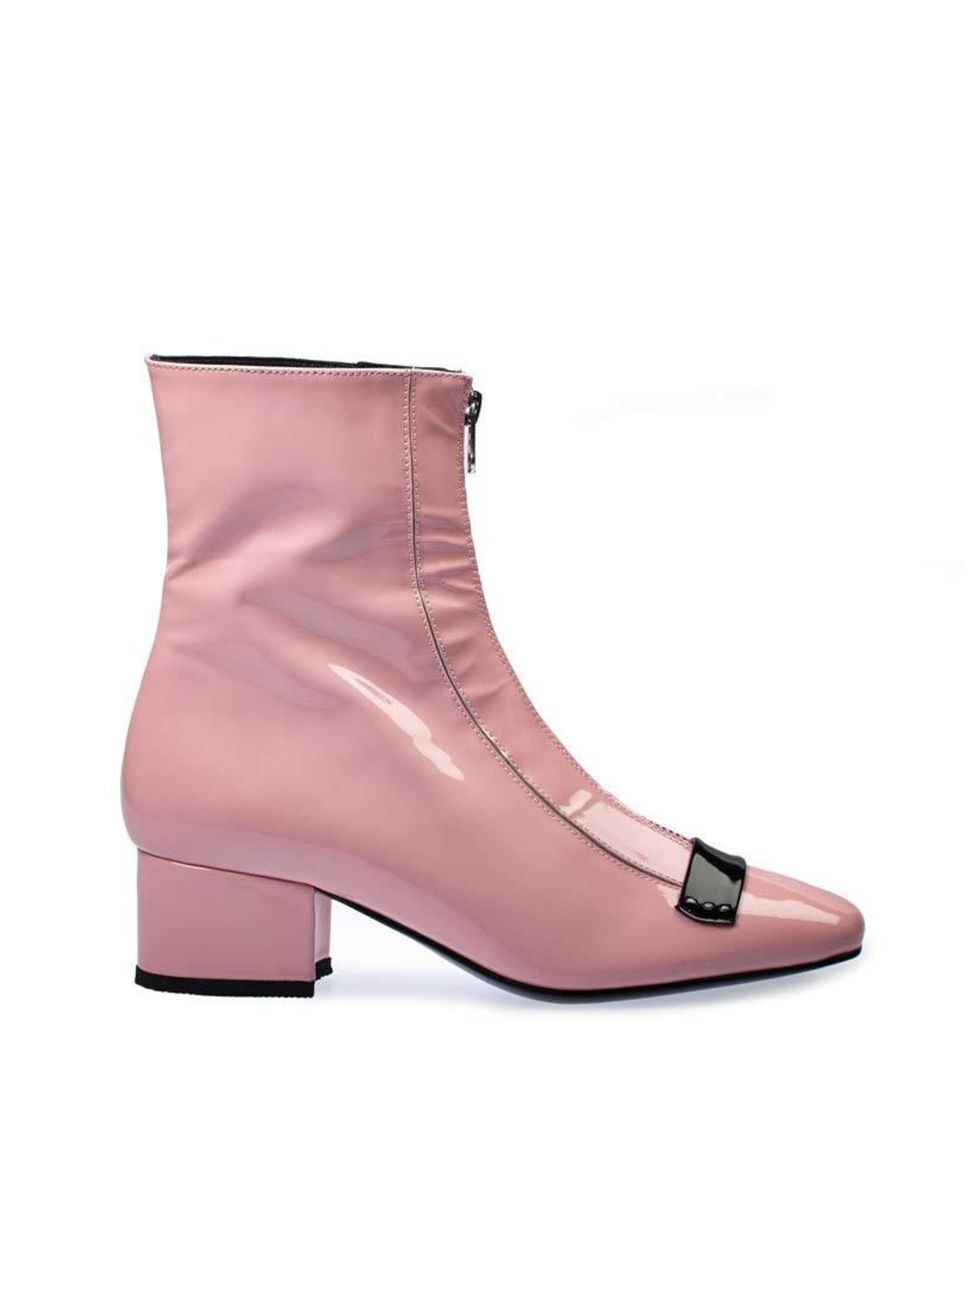 <p>Powder-pink ankle boots might seem a bit out there, but try them with mid-blue jeans and navy peacoat. You might just surprise yourself. </p>

<p> </p>

<p><a href="http://www.dorateymur.com/aw-14-15-shop/double-delta.html" target="_blank">Dorateymur</